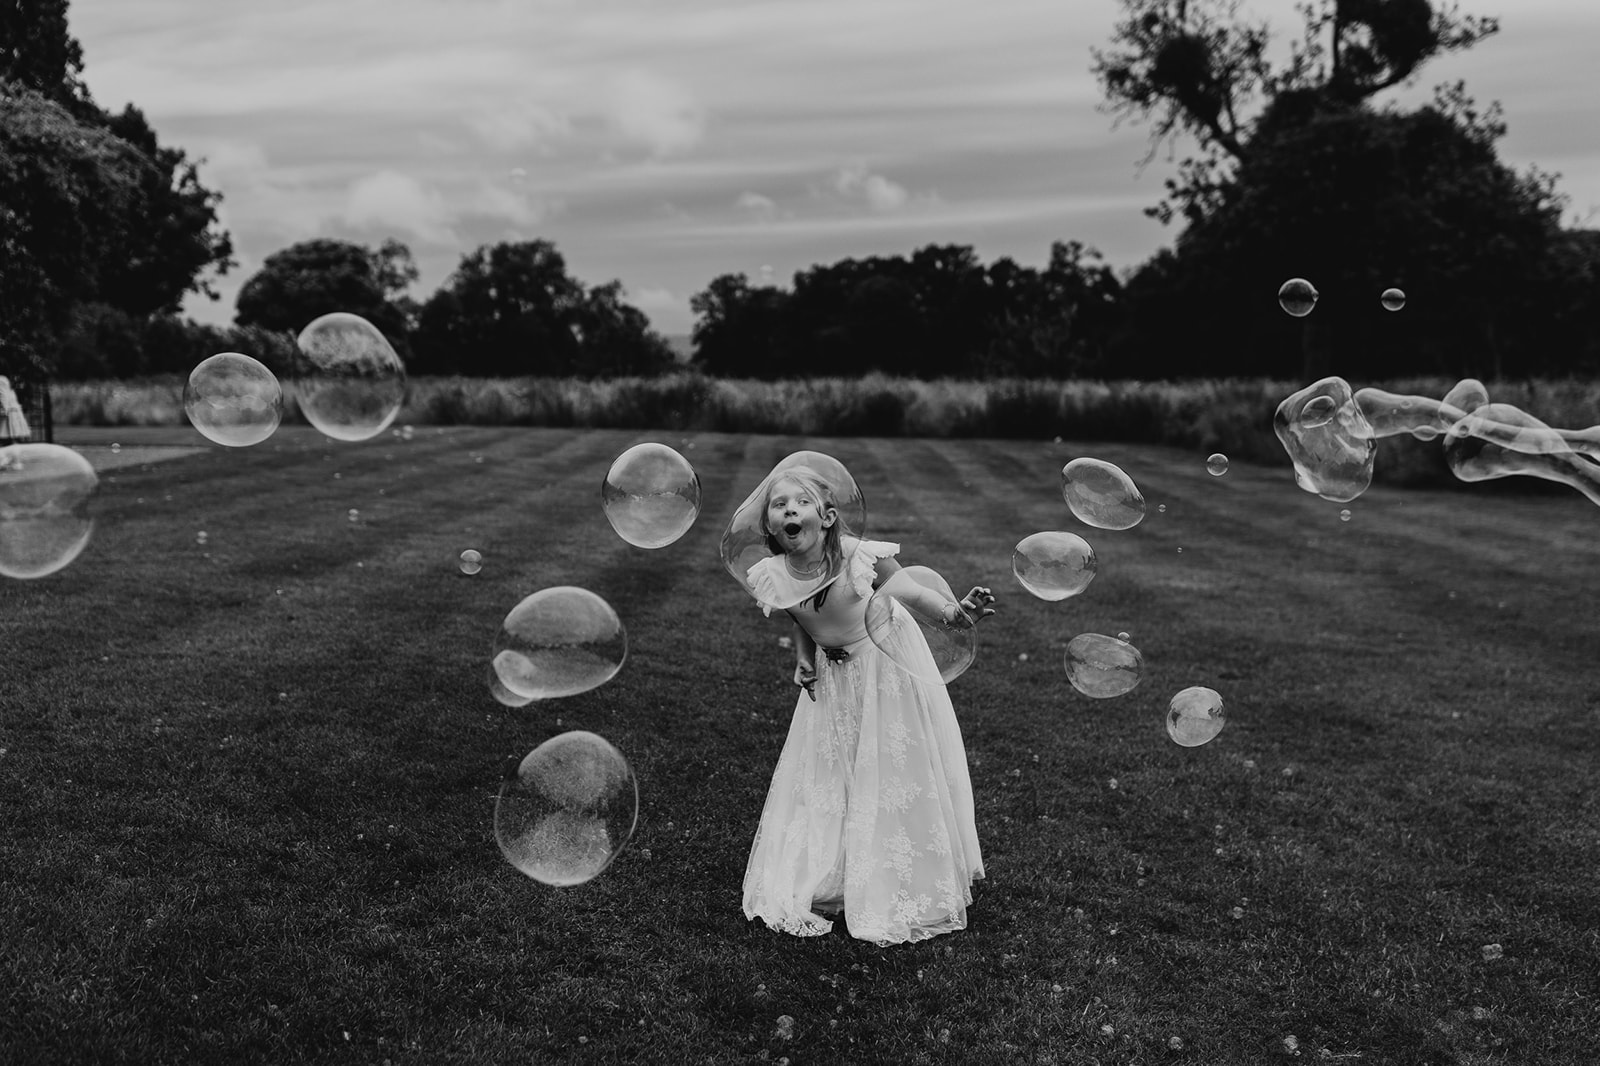 Photojournalistic wedding image depicting a young girl in a white dress enjoying large soap bubbles in a field